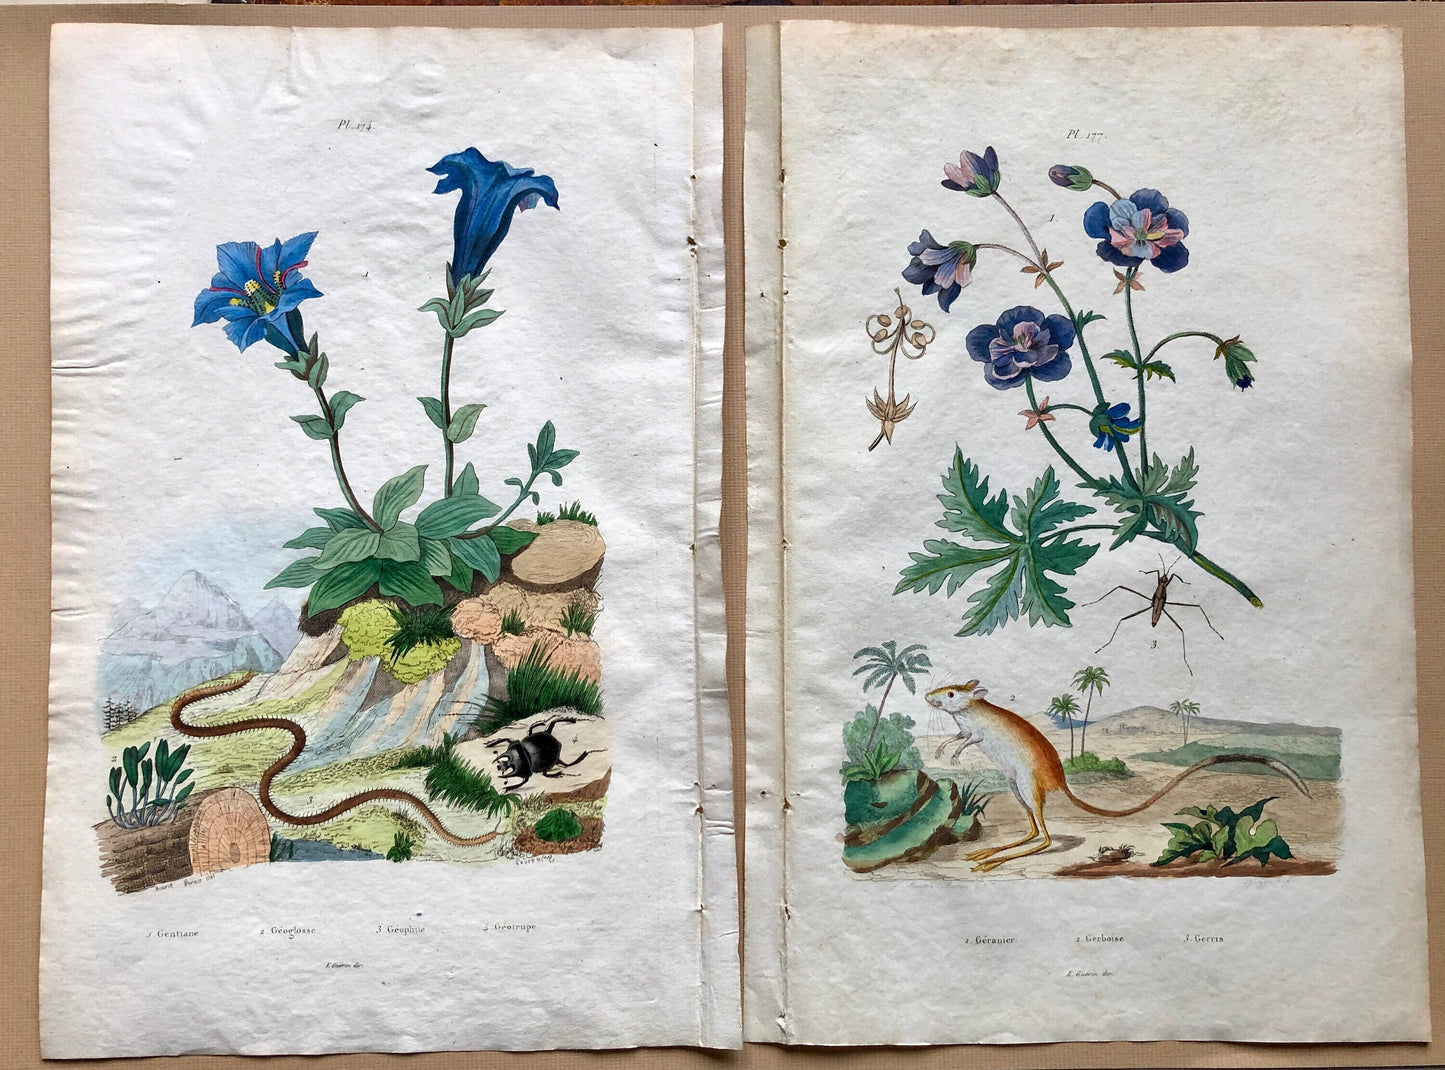 Two Antique Prints (1830s) From a French Dictionary Featuring Plants, Insects and a Jerboa. Size: 28. X 18 cms.